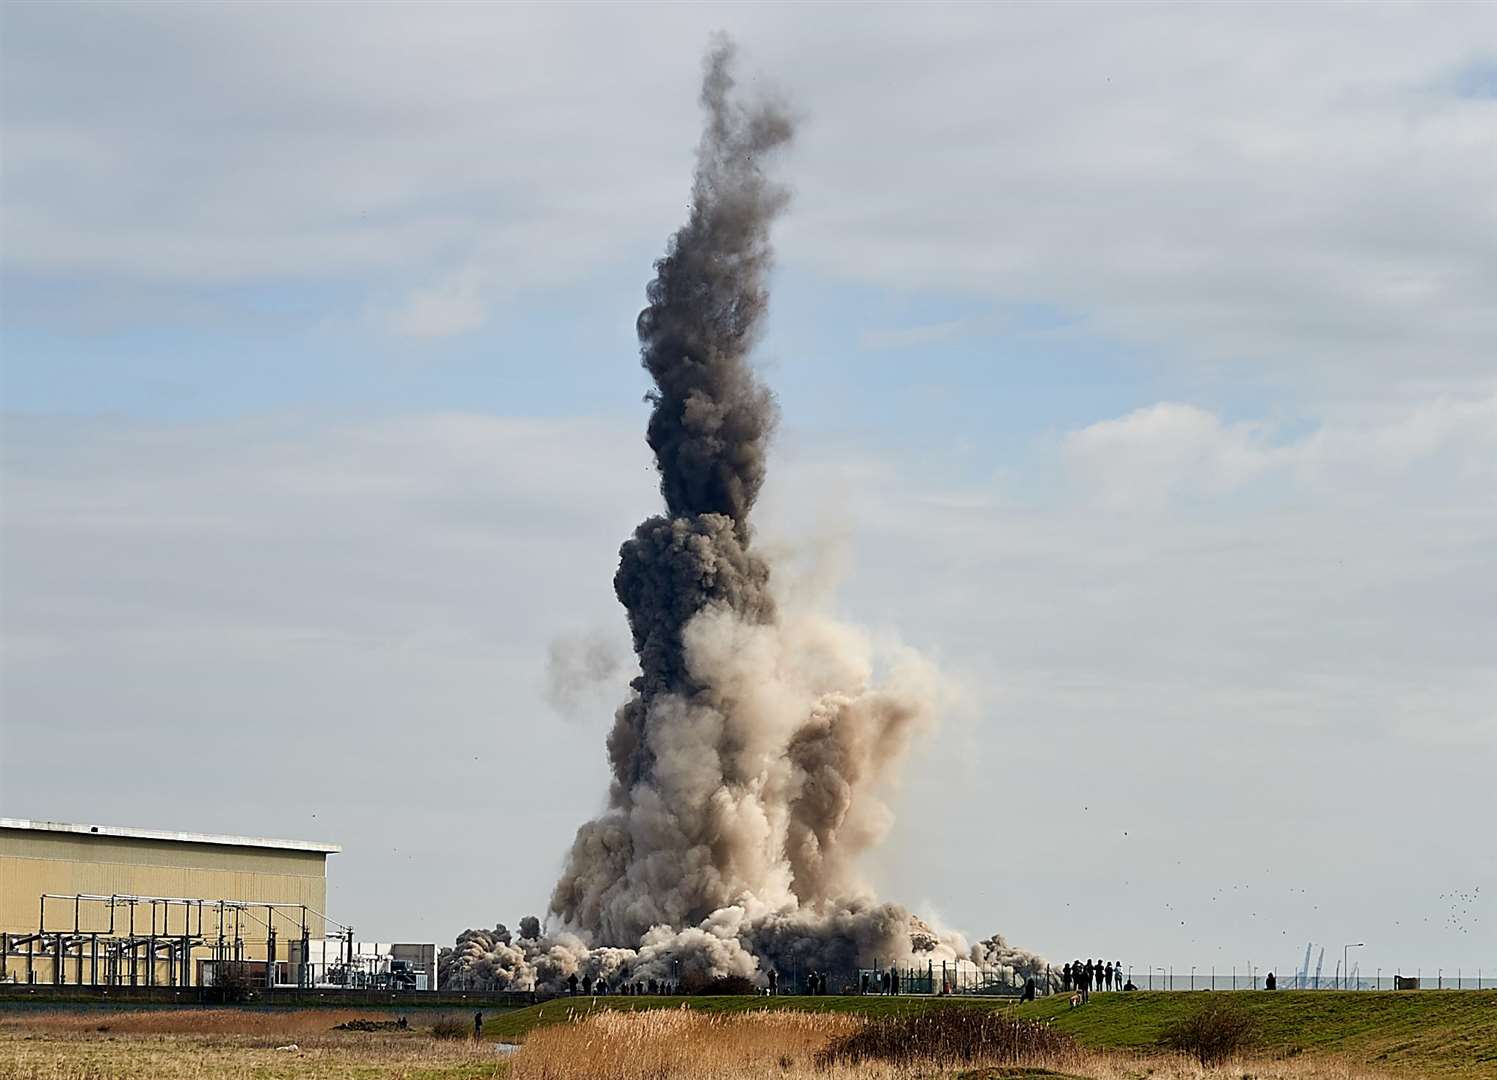 The demolition of the chimney at Kingsnorth Power Station